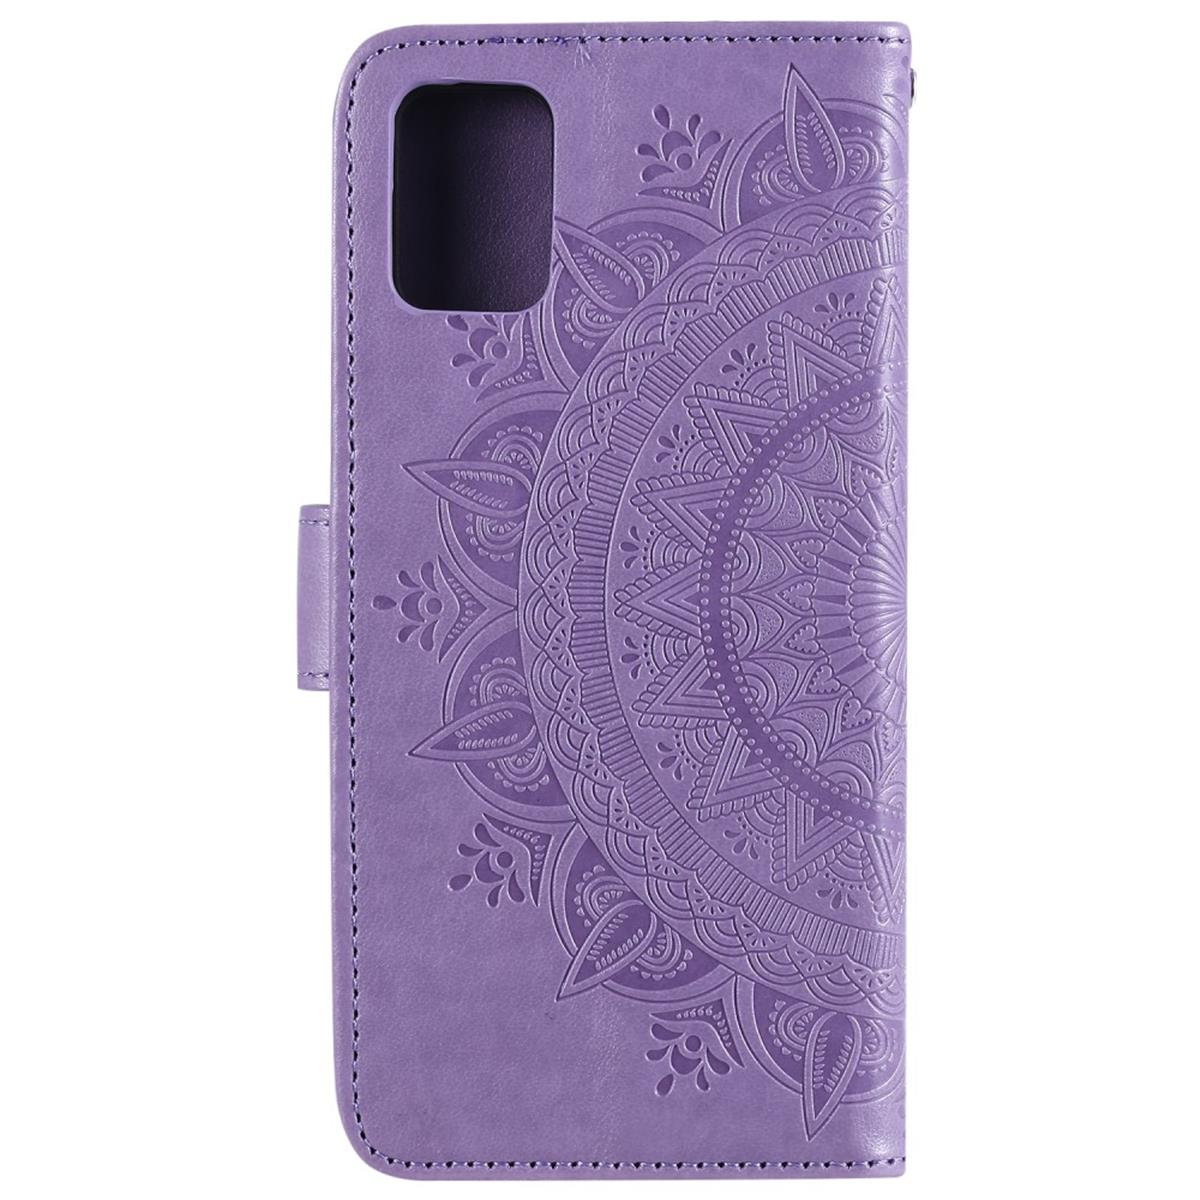 COVERKINGZ Klapphülle Bookcover, Lila Mandala Galaxy Muster, A31, Samsung, mit